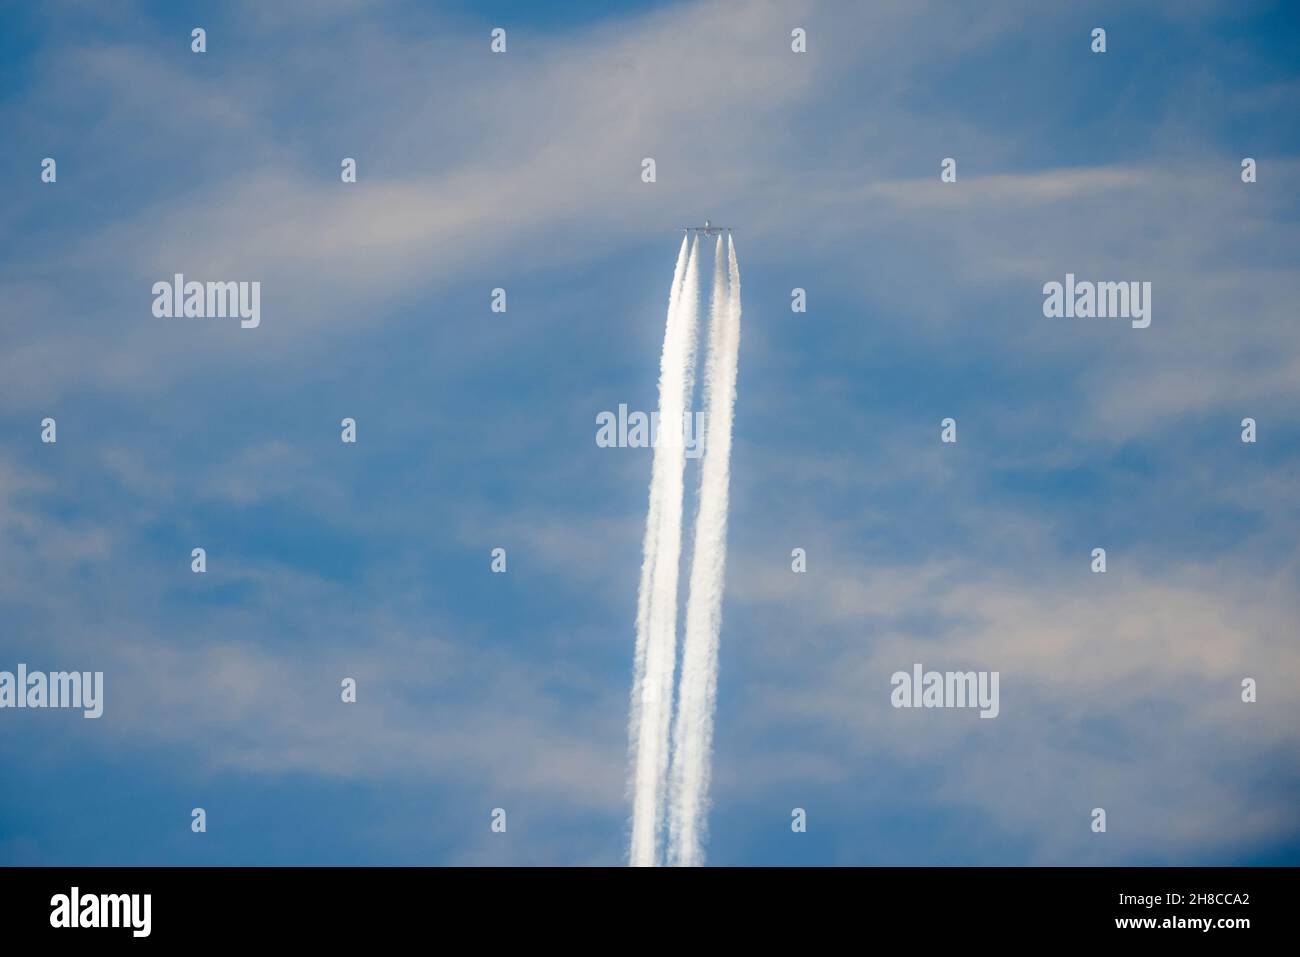 Boeing Airbus A 380 with contrails, Germany Stock Photo